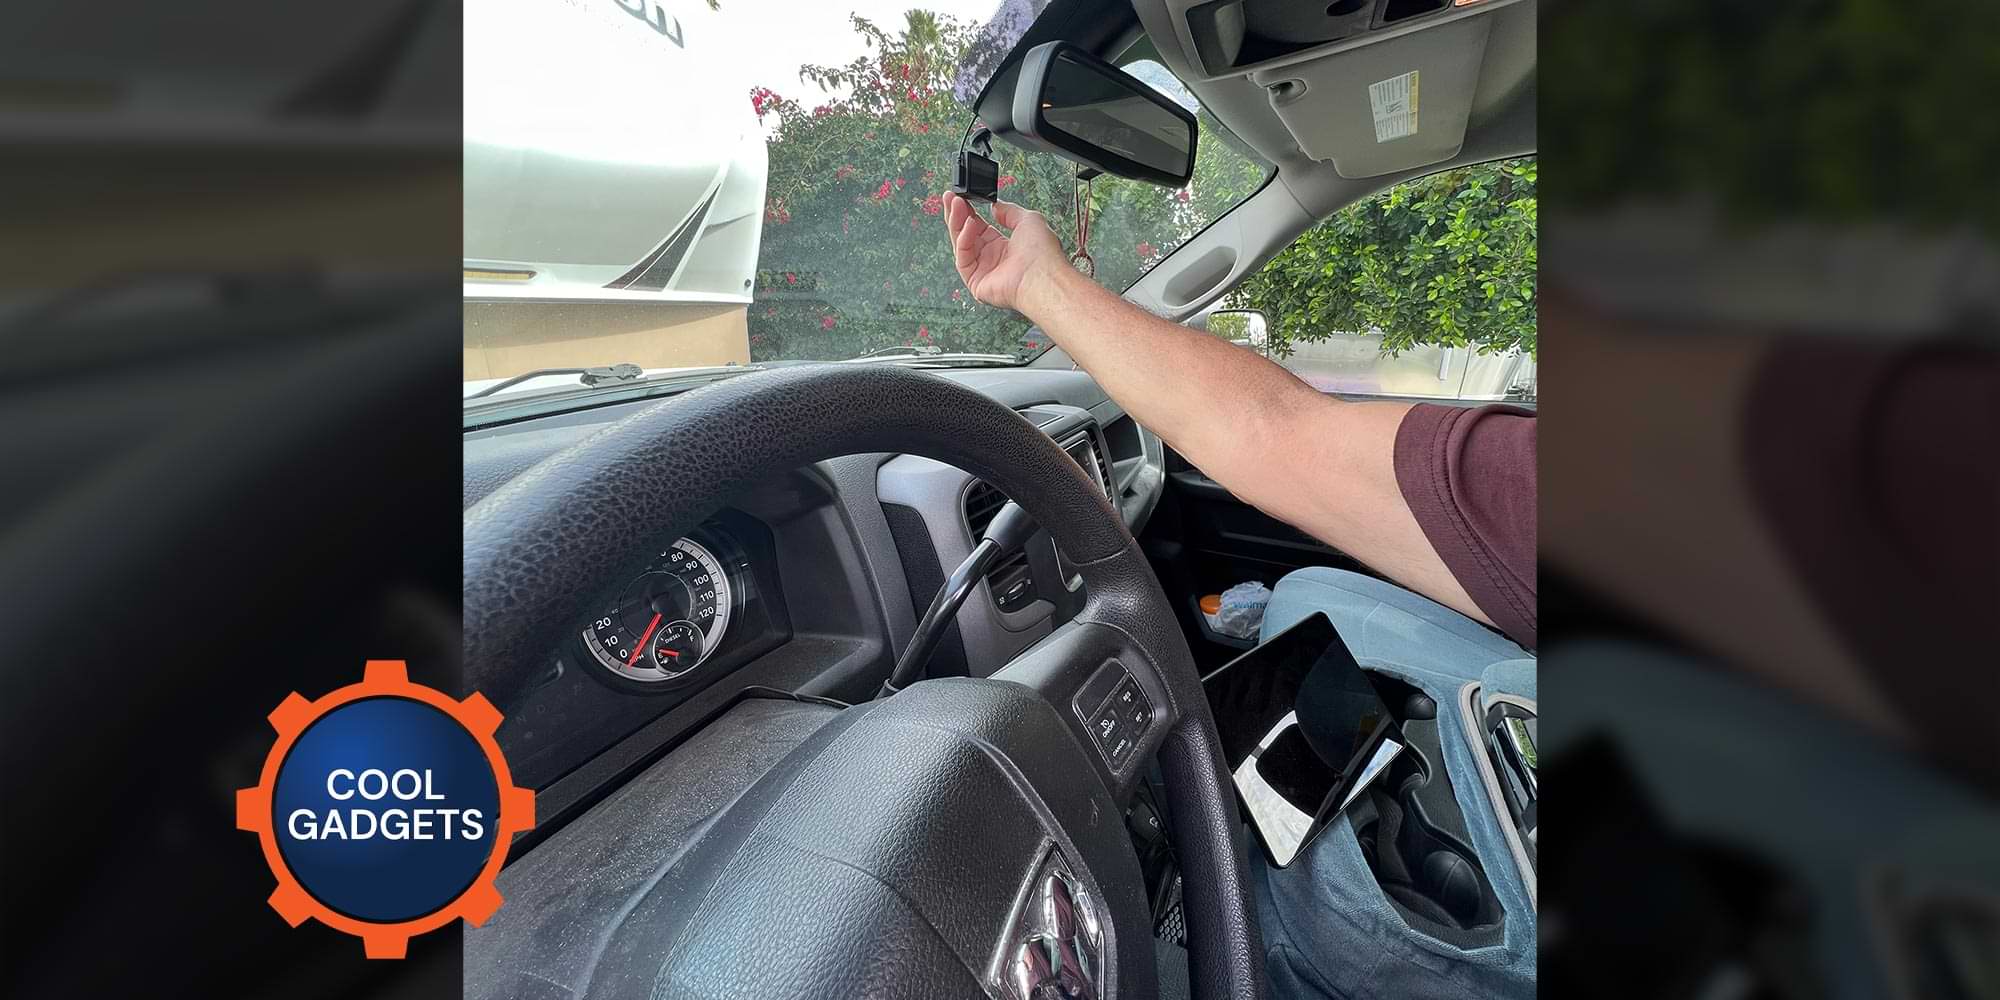 an arm reaches out to a device connected to a car windshield beneath the rear view mirror